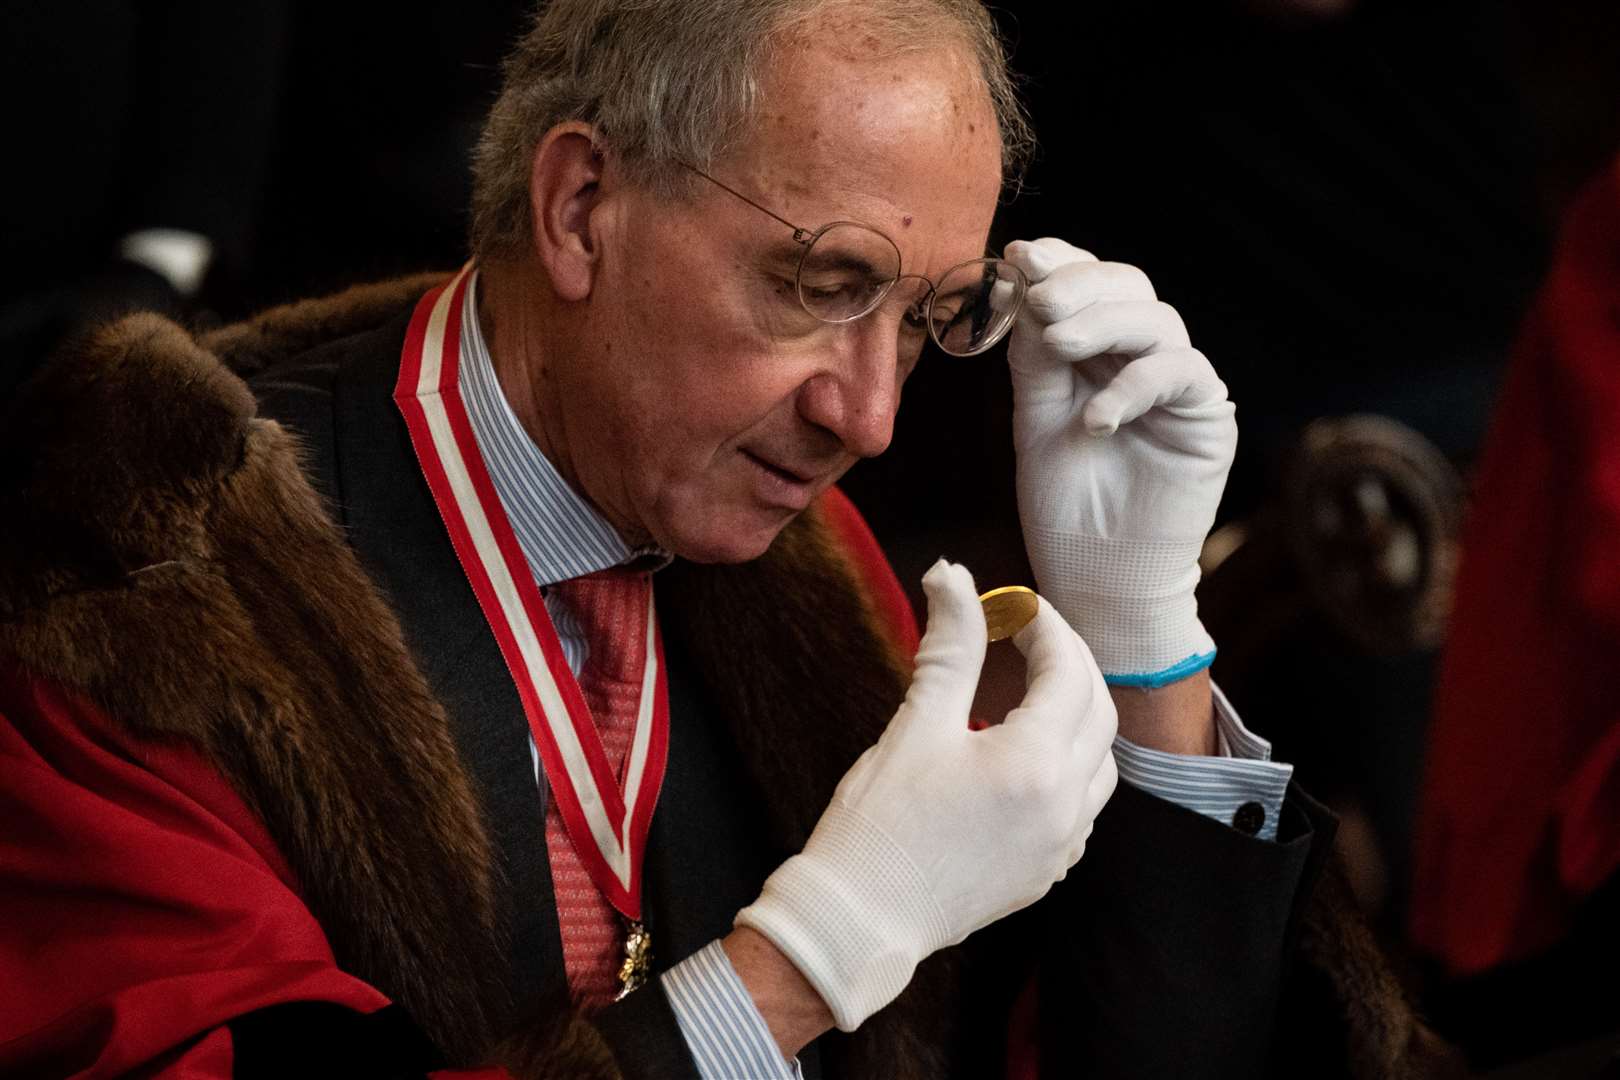 The Trial of the Pyx (Aaron Chown/PA)